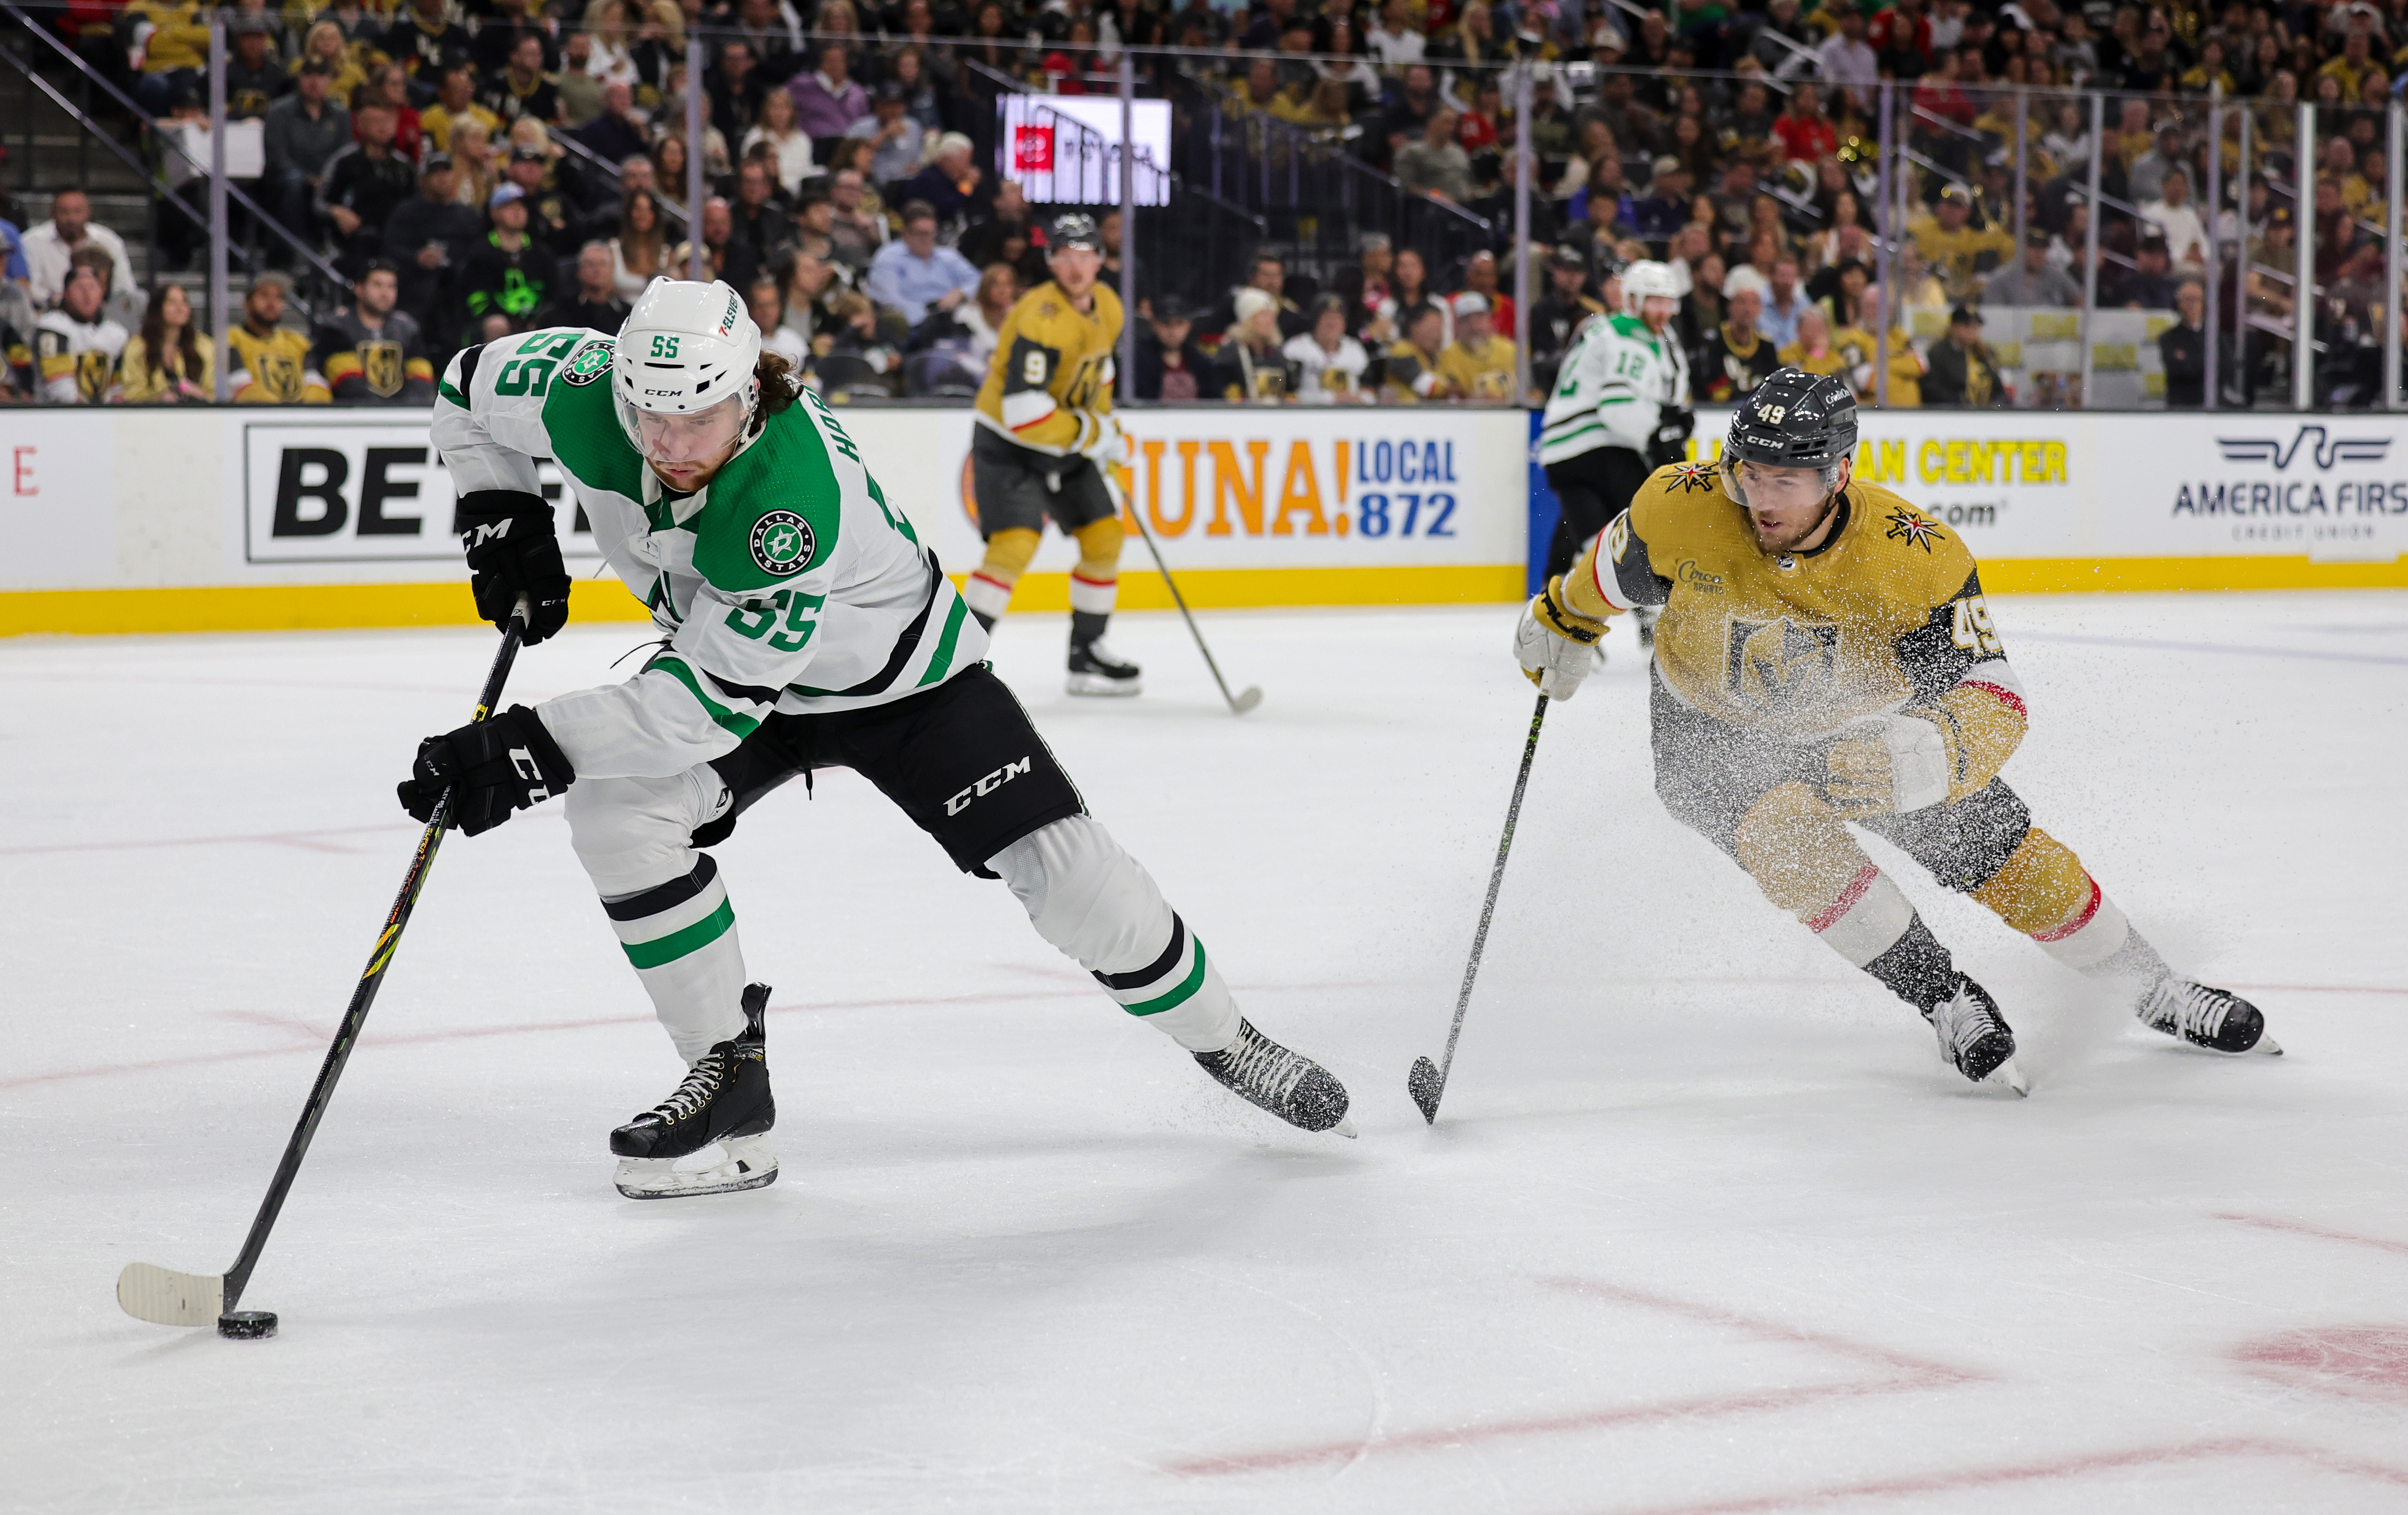 Thomas Harley #55 of the Dallas Stars skates with the puck ahead of Ivan Barbashev #49 of the Vegas Golden Knights in the second period of Game One of the Western Conference Final of the 2023 Stanley Cup Playoffs at T-Mobile Arena on May 19, 2023 in Las Vegas, Nevada. The Golden Knights defeated the Stars 4-3 in overtime.